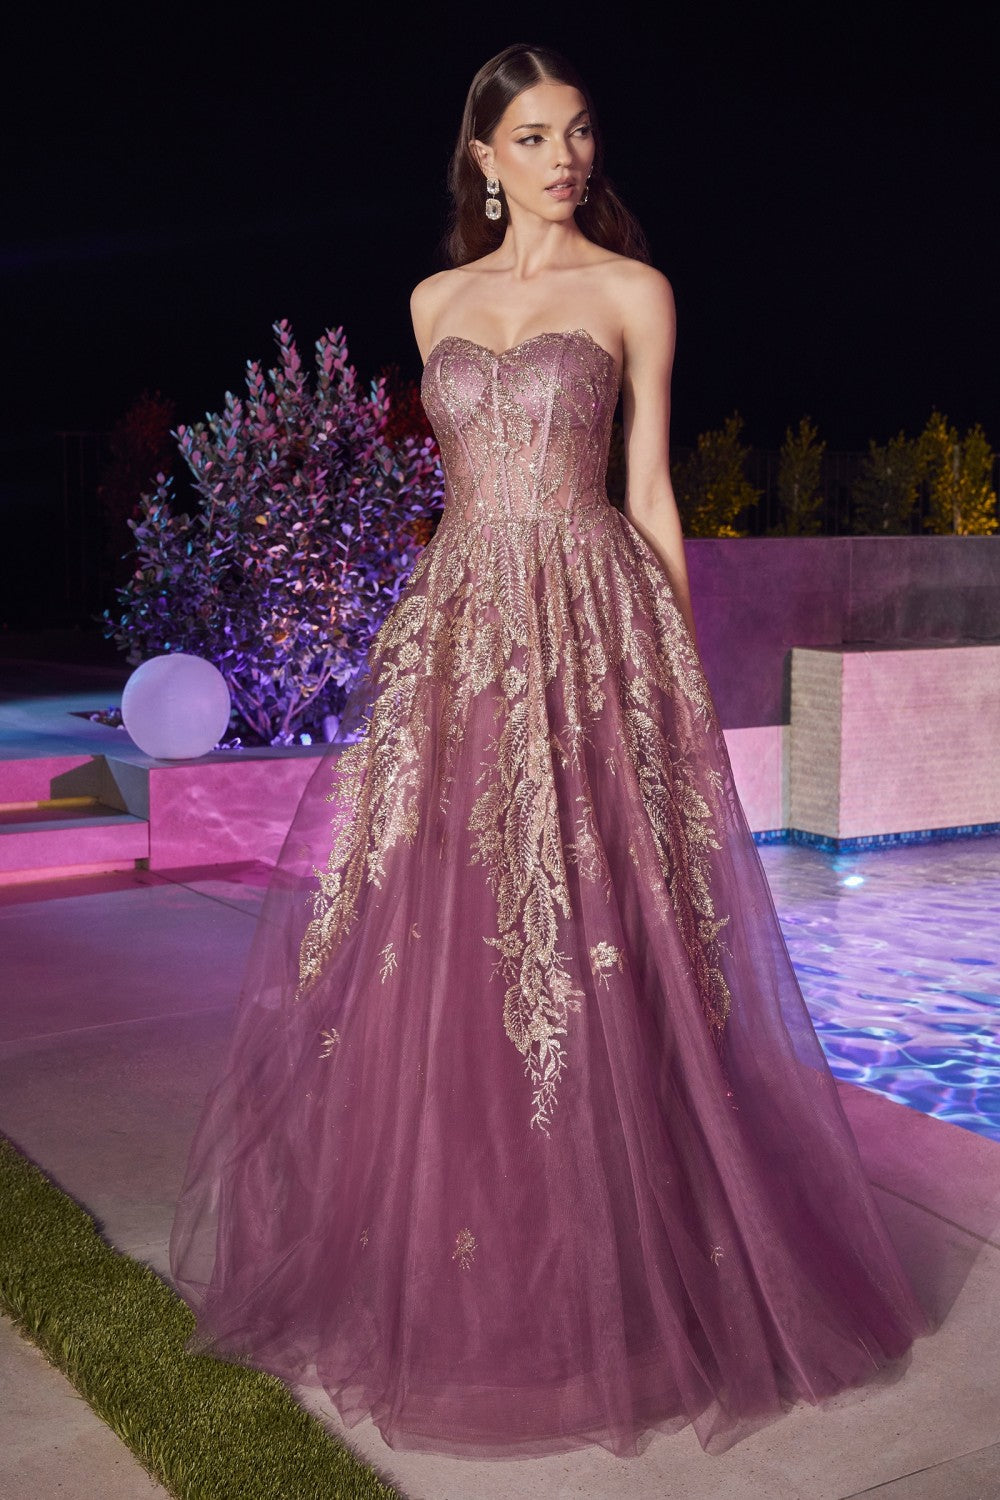 Gold-violet Strapless Layered Tulle Ball Gown J852 - Women Evening Formal Gown - Special Occasion